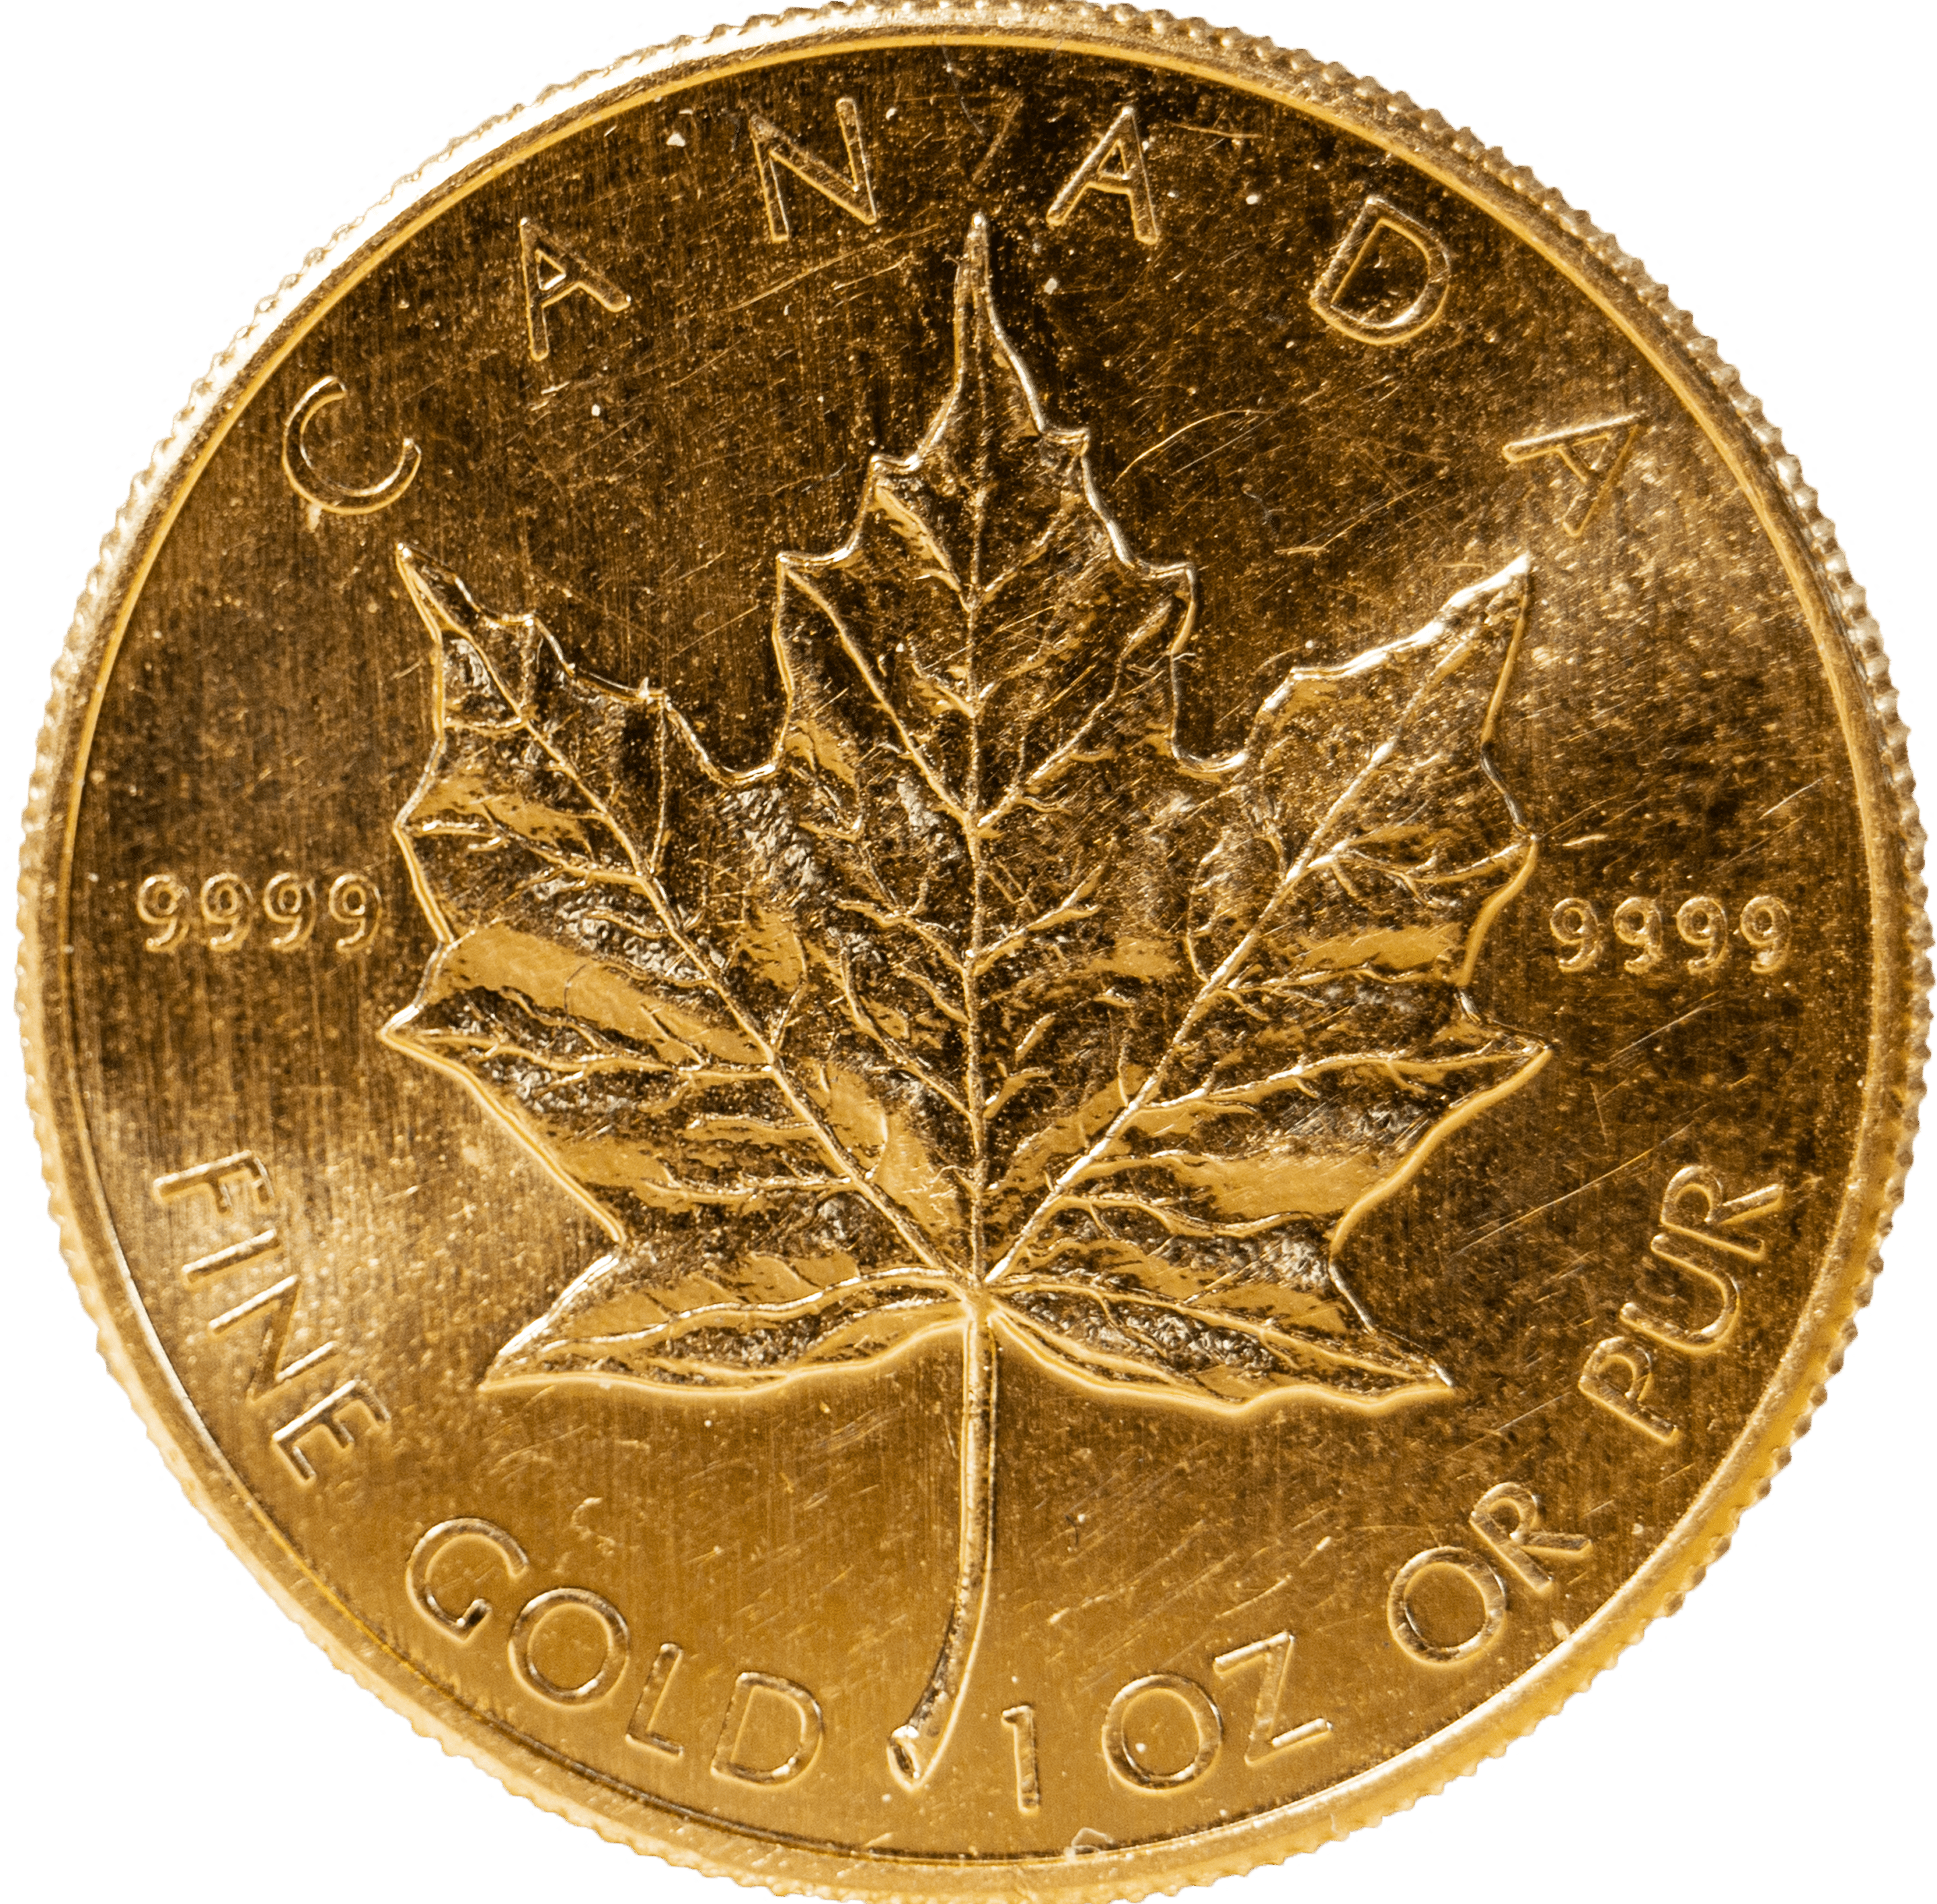 Buy Gold Canadian Maple Leaf coins from Accurate Precious Metals